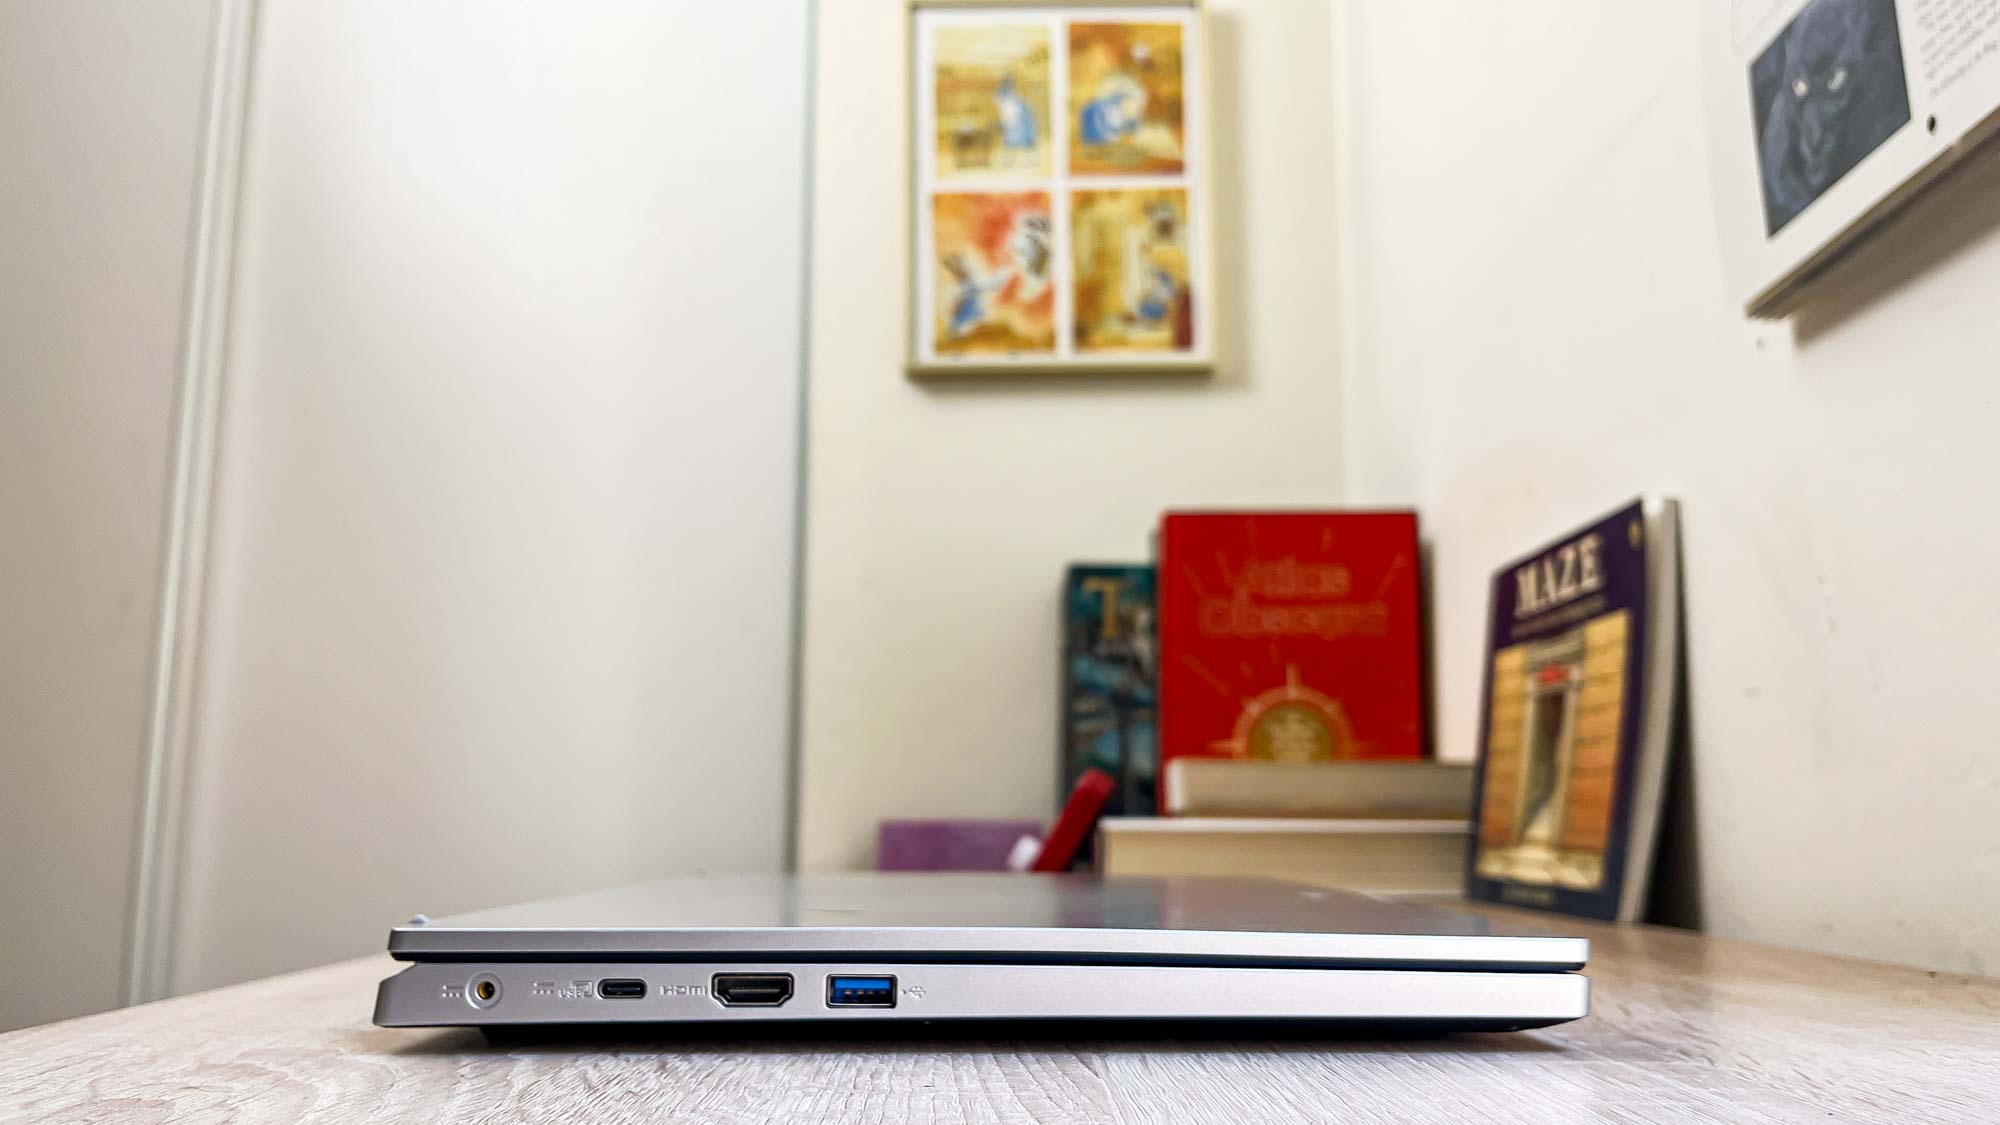 amazon, i review pcs for a living and this $300 laptop does more than an ipad for less